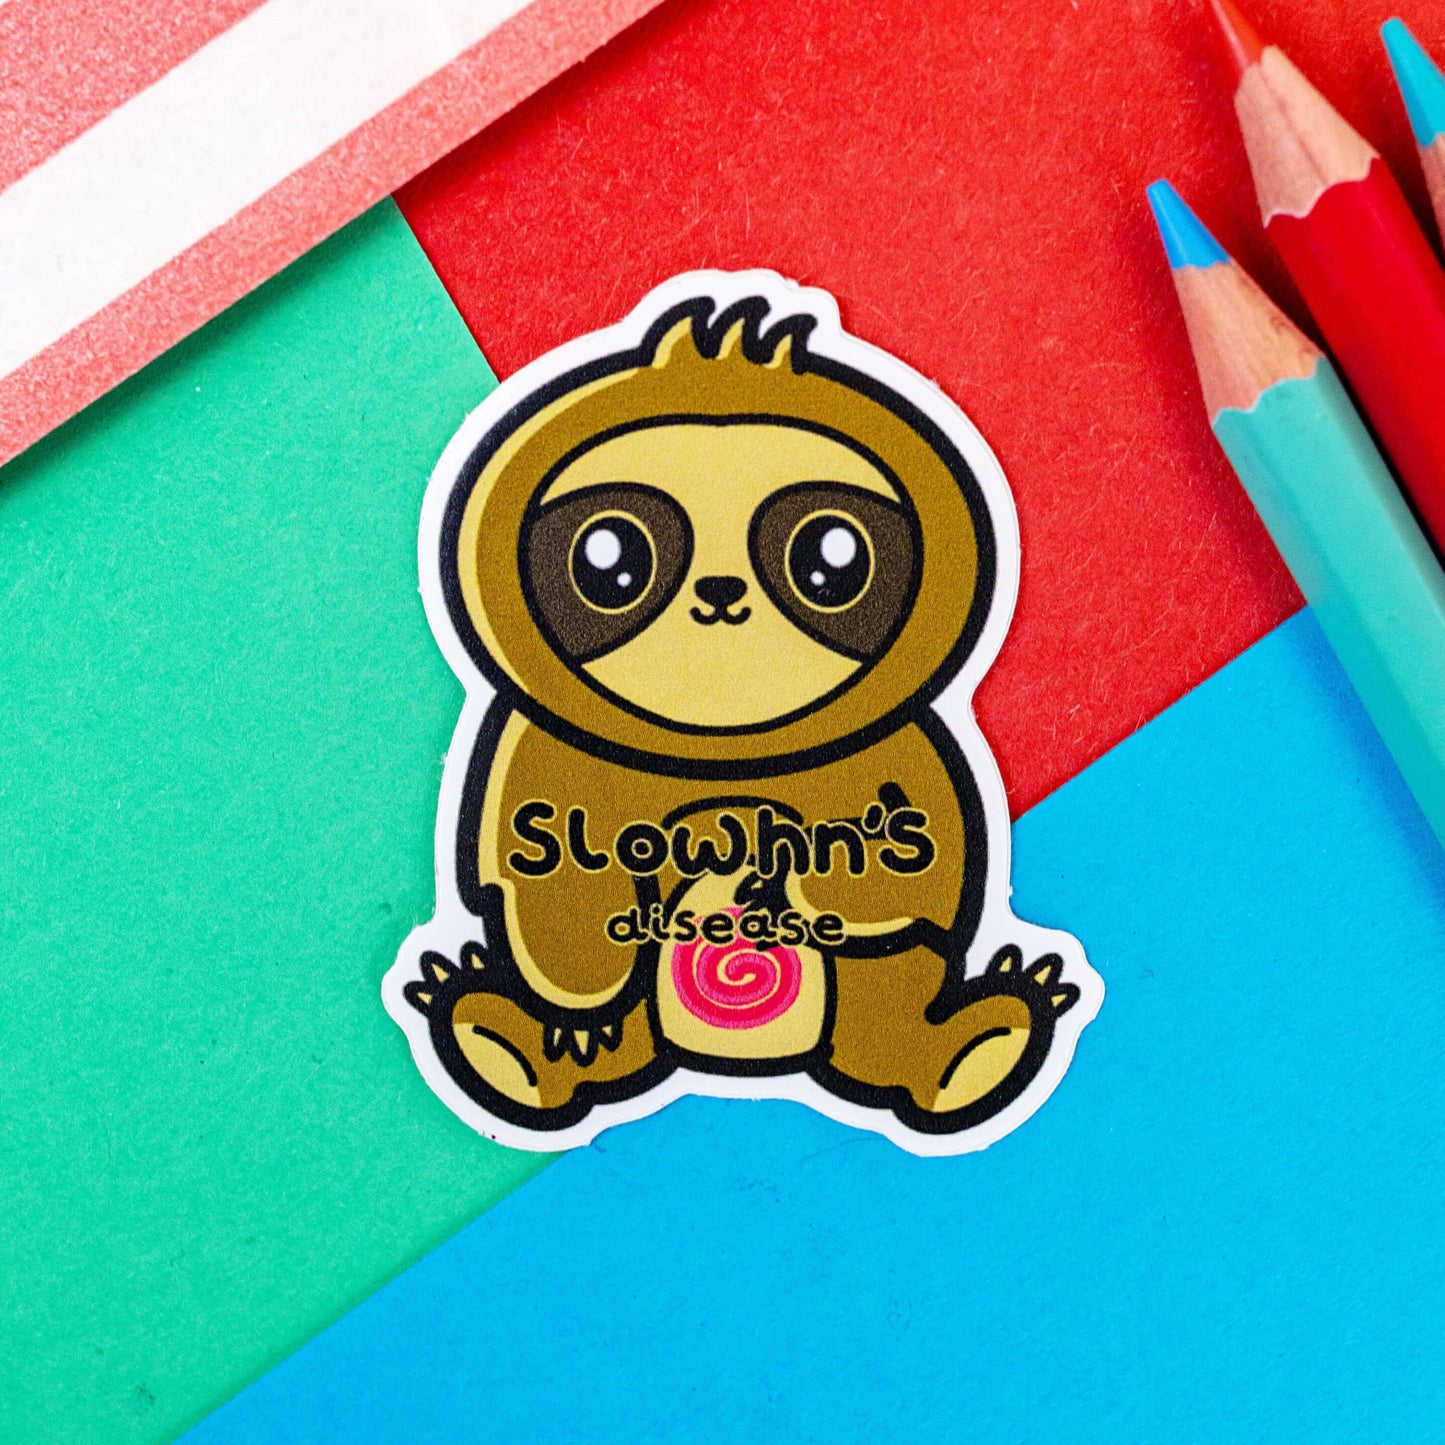 The Slowhn's Disease Sloth Sticker - Crohn's Disease on a red, blue and green background with colouring pencils and a red stripe candy bag. The sloth shape sticker is smiling sat down clutching its tummy that has a red swirl and text reading 'slowhn's disease'. The design is raising awareness for crohn's disease.